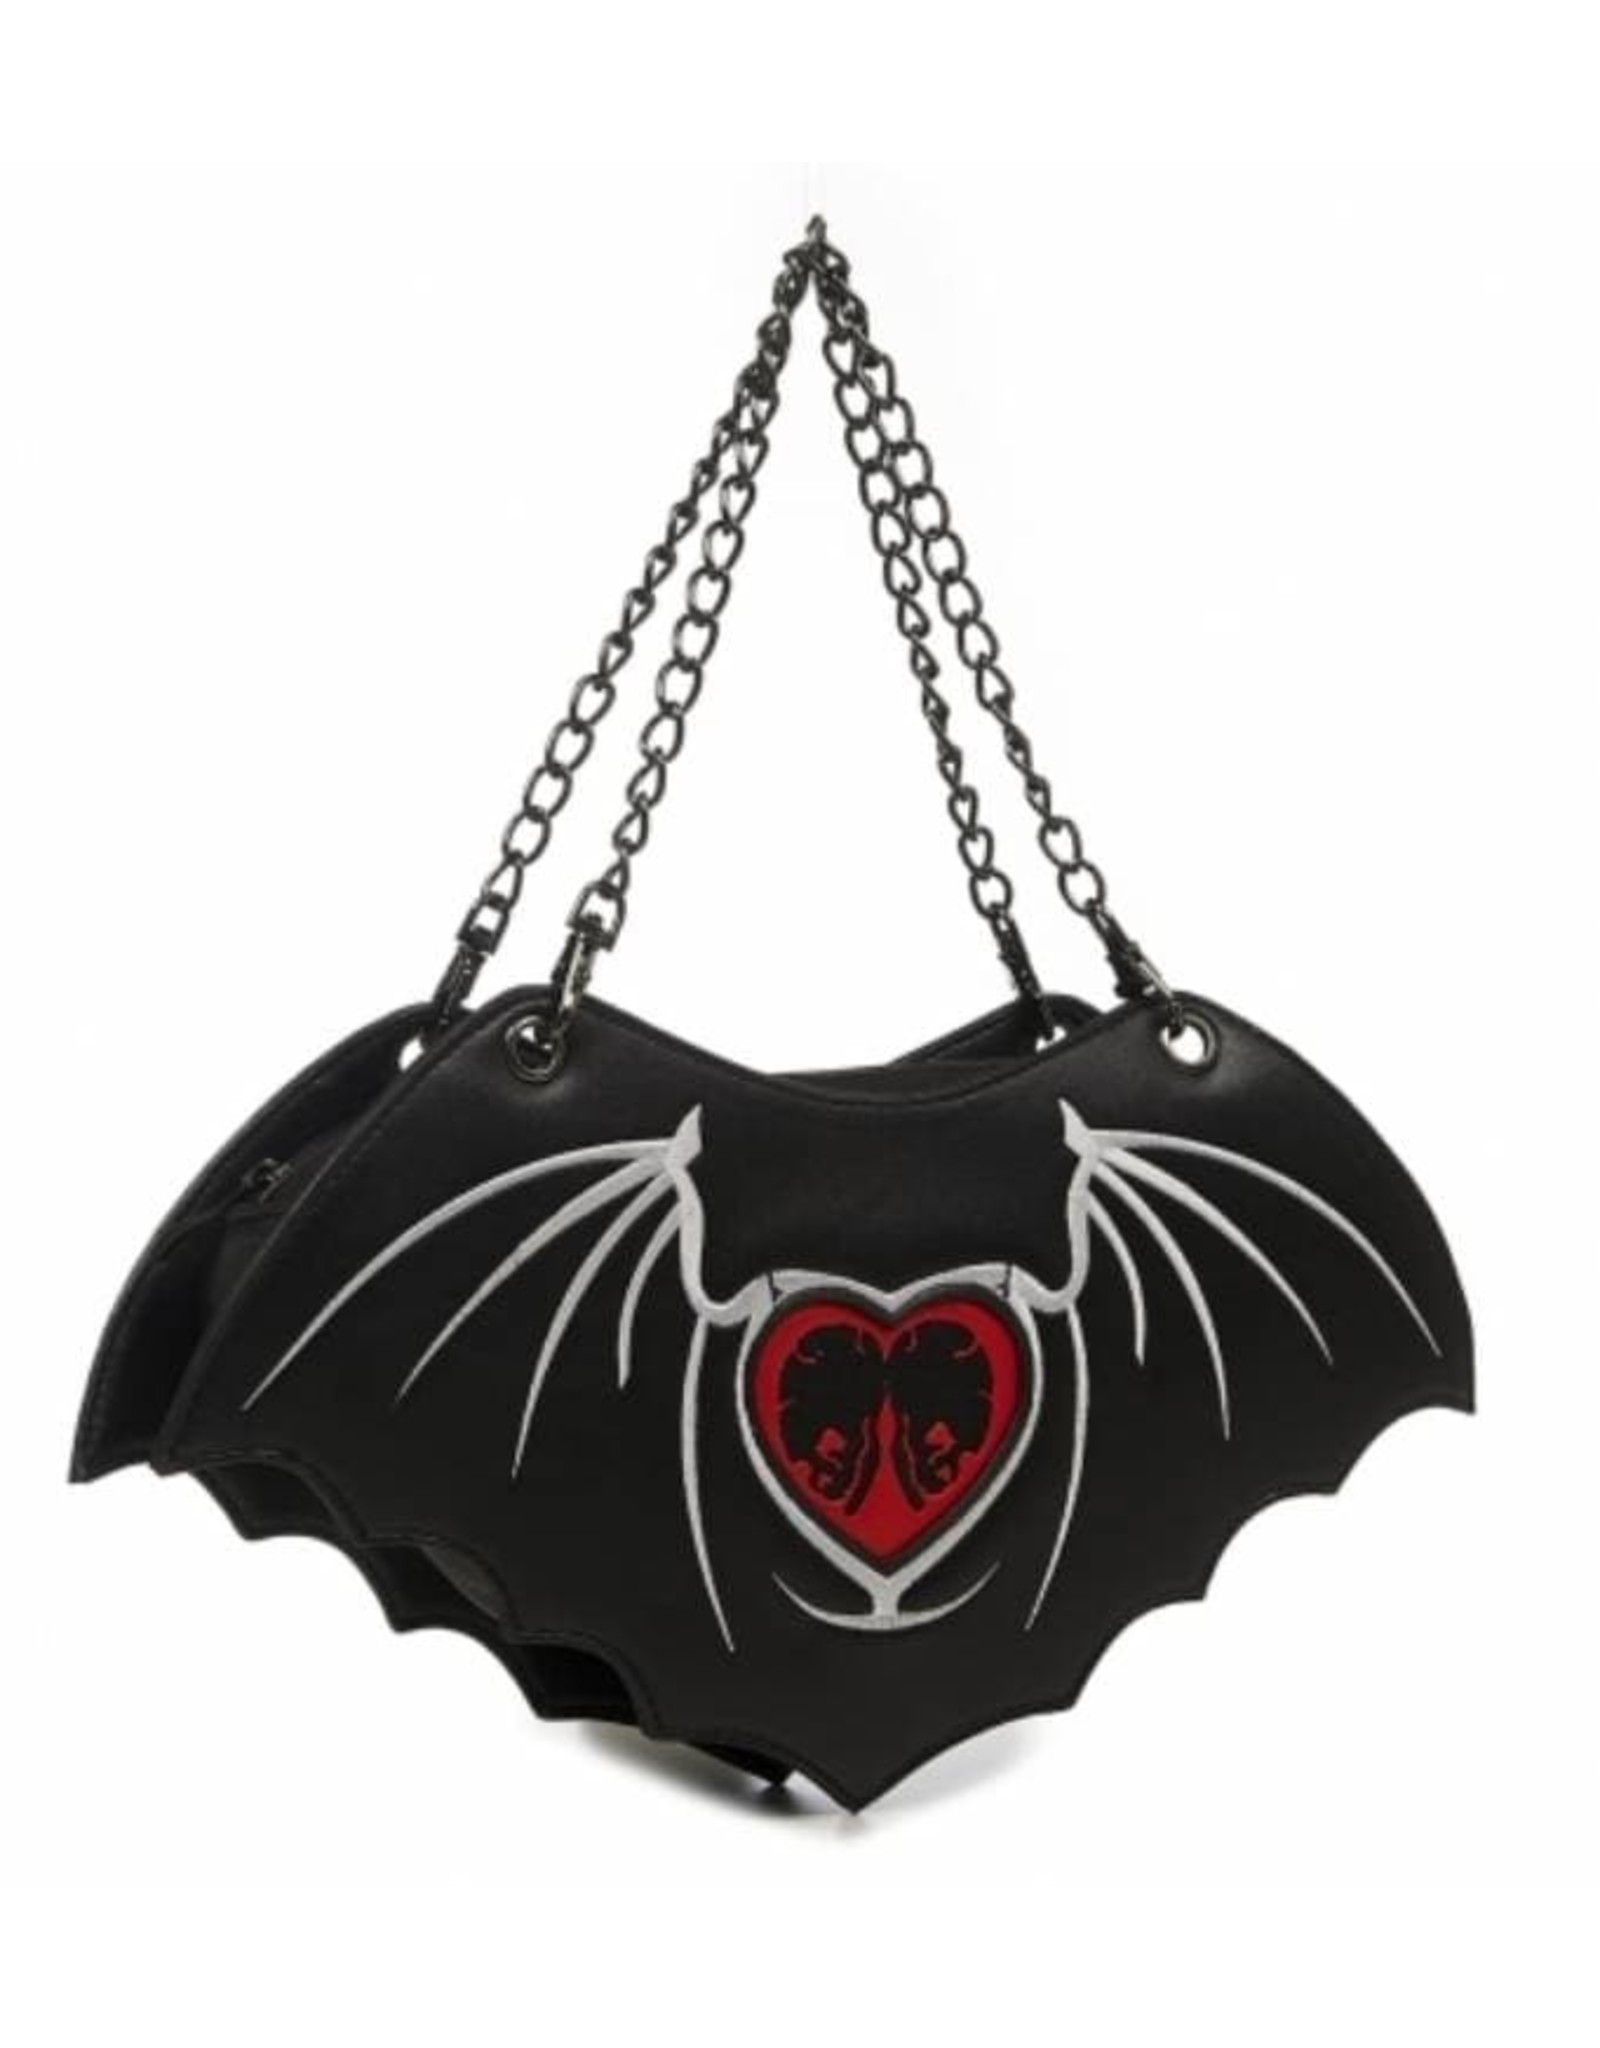 Gothic Gothic bags and Steampunk bags - Banned  Bat out of Hell backpack